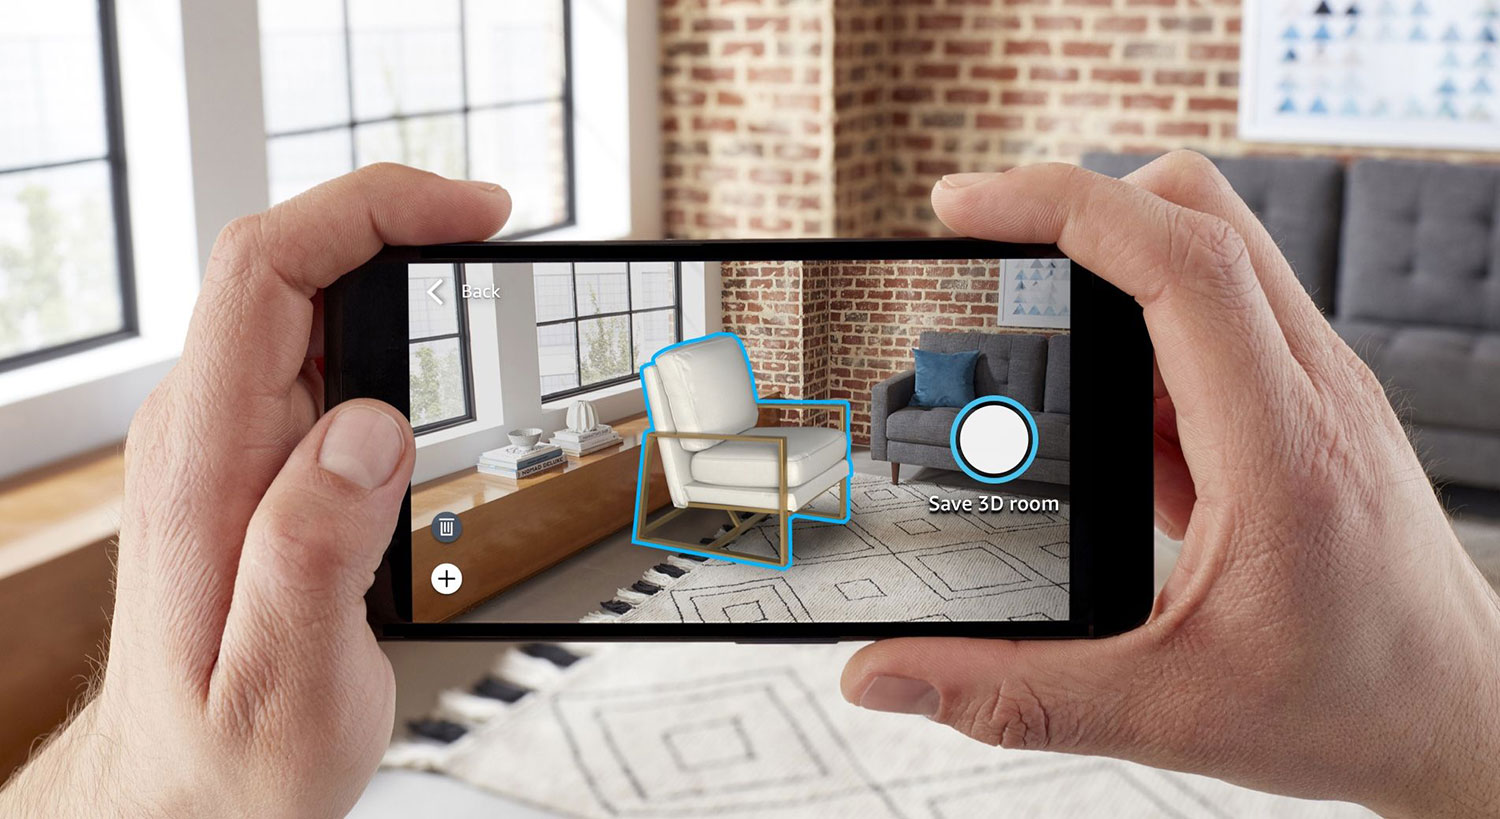 Amazon's new AR shopping tool lets you decor your room with virtual furniture.